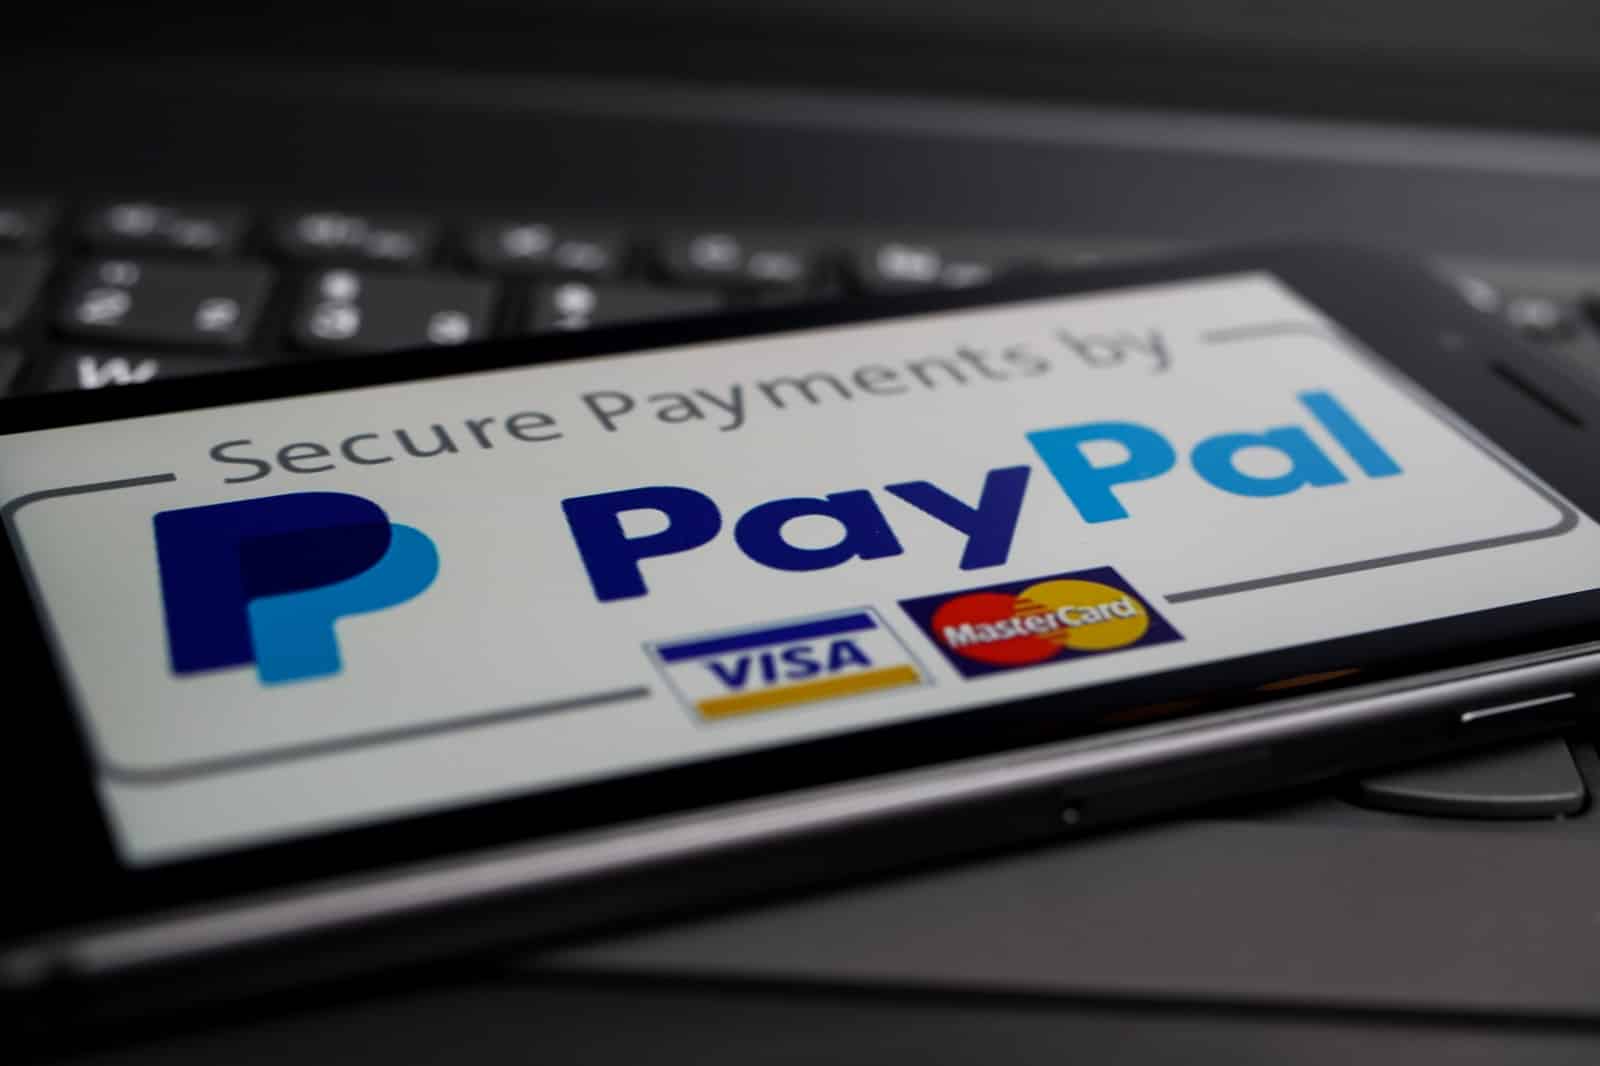 <p><span>A familiar name for many, PayPal offers a secure way to make and receive payments globally. It’s particularly useful for international online purchases or when you need a reliable backup payment option. While fees can be high for currency conversion, its widespread acceptance makes it a practical choice.</span></p> <p><b>Insider’s Tip: </b><span>Link your PayPal account to a travel credit card to accumulate rewards or miles on your transactions.</span></p>